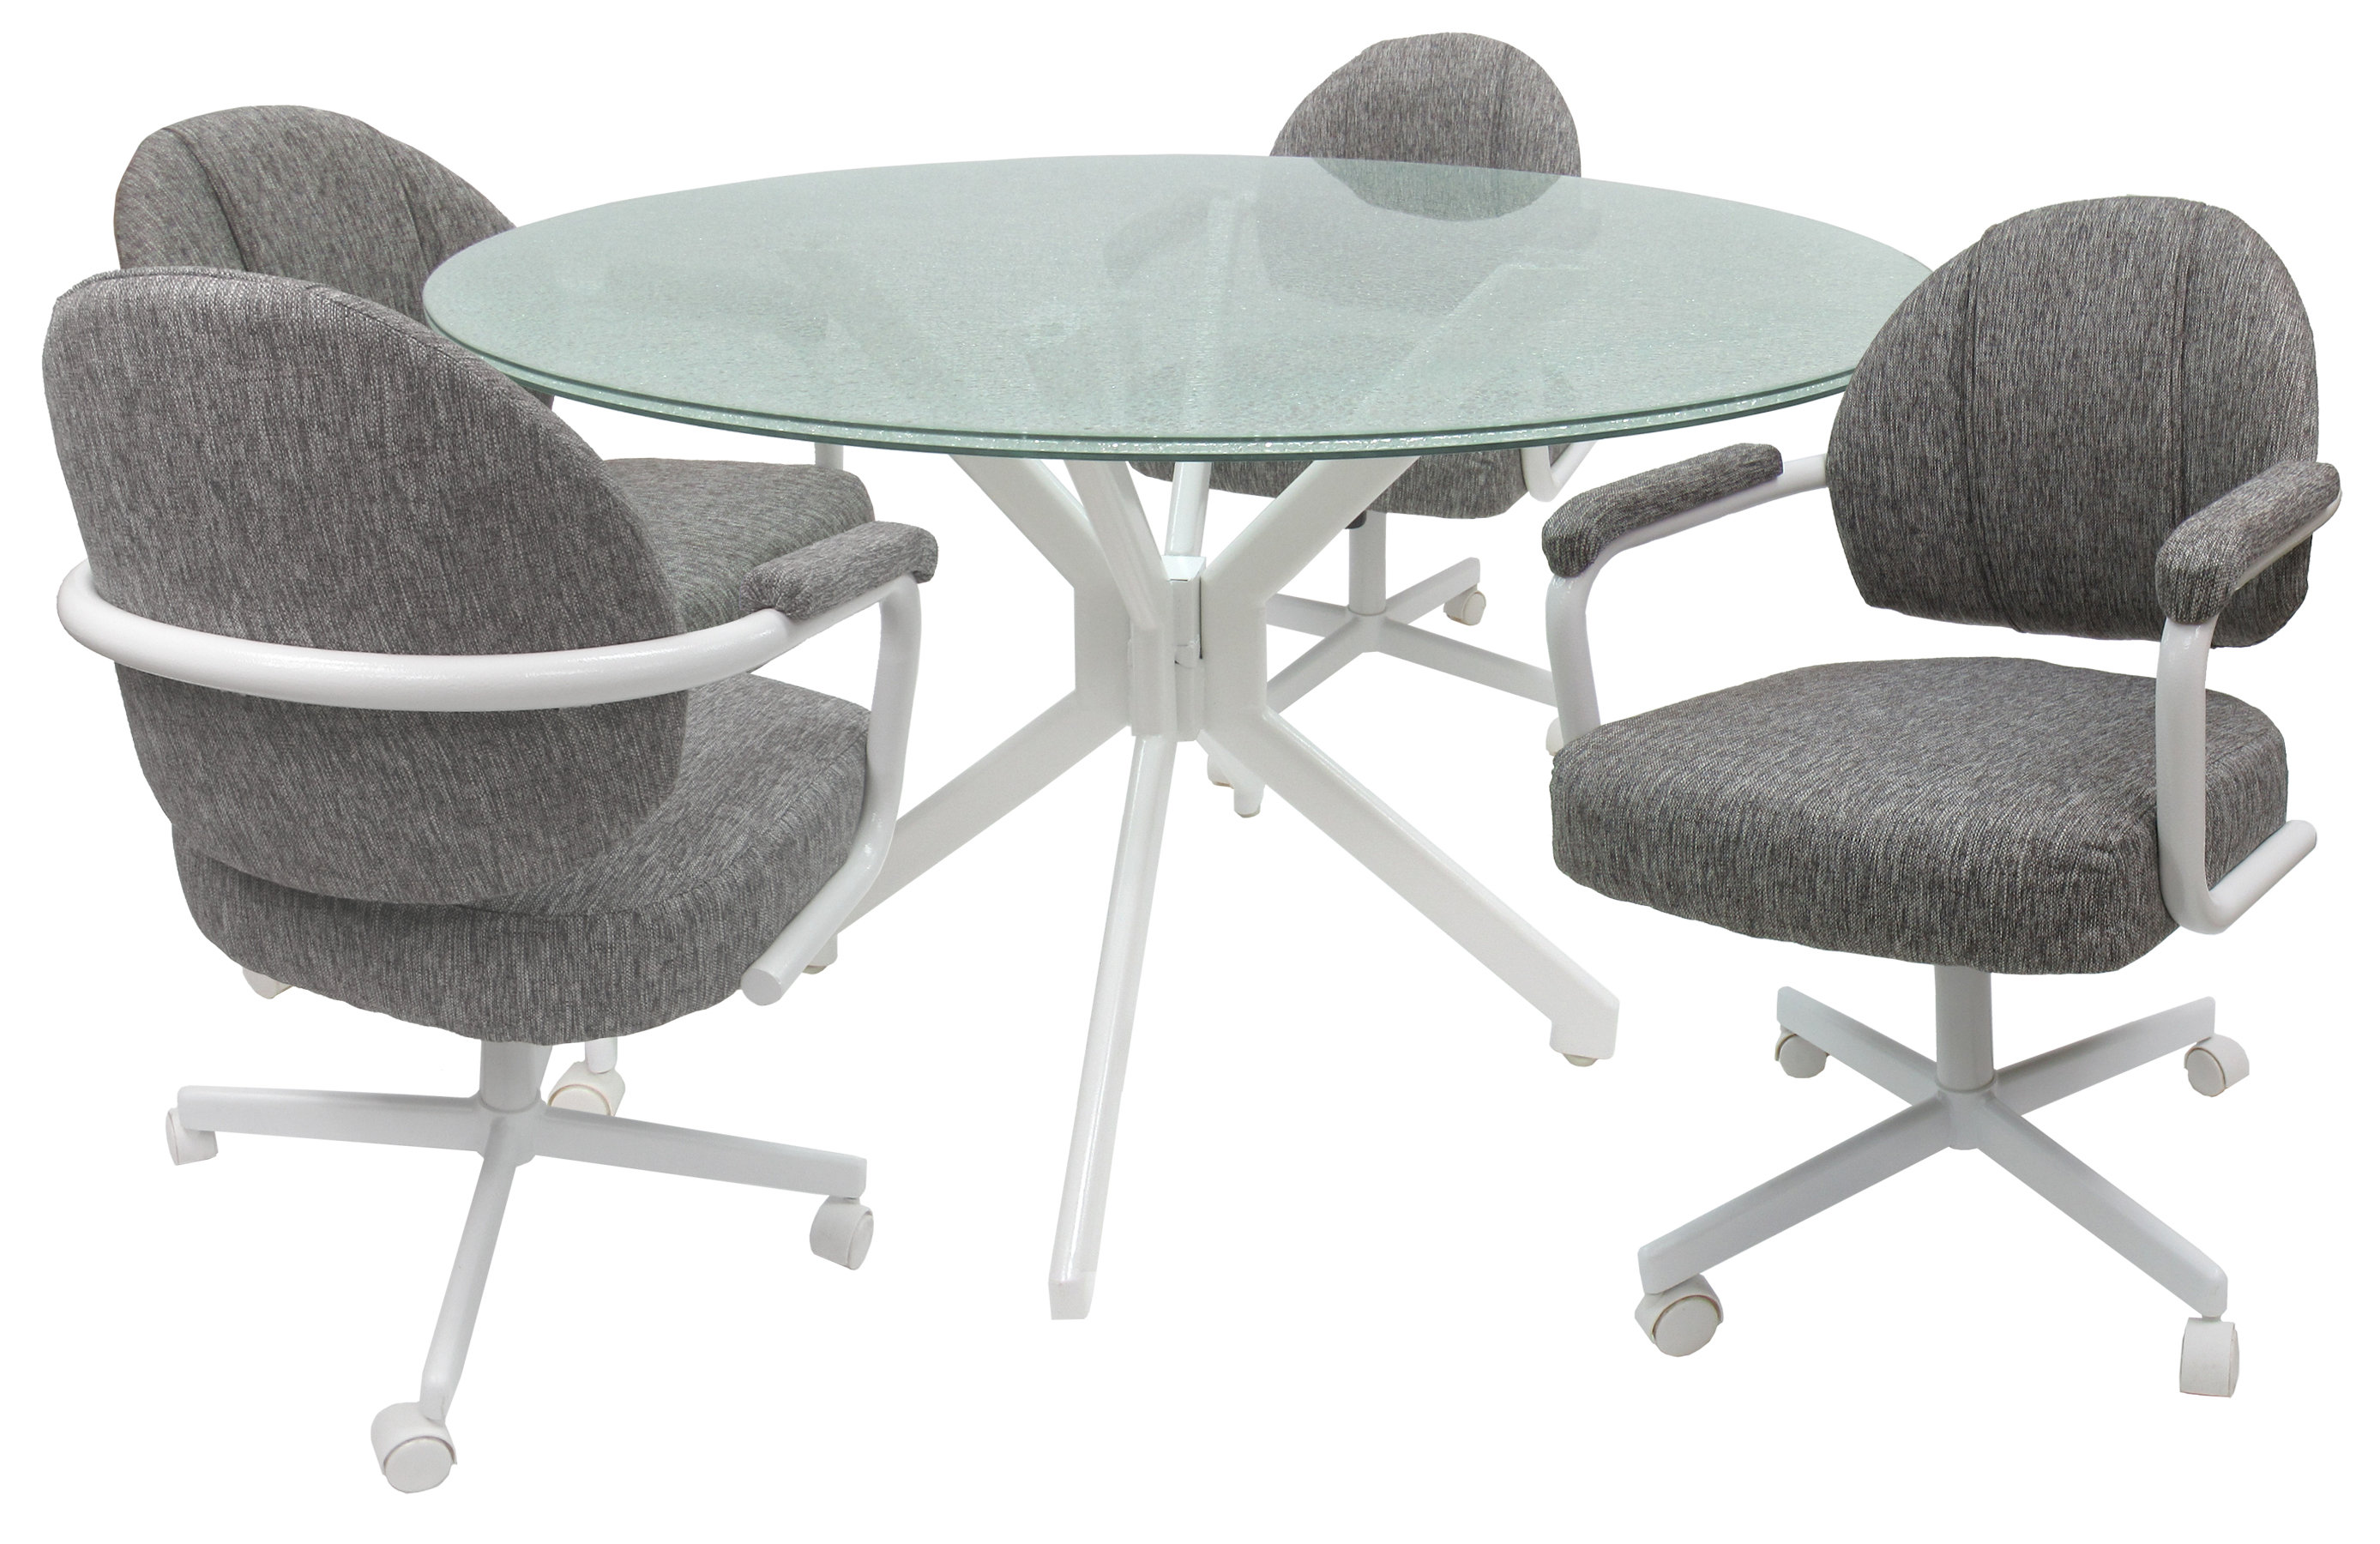 5 Piece Dinette Set With Caster Chairs Cherry Finish Pastel